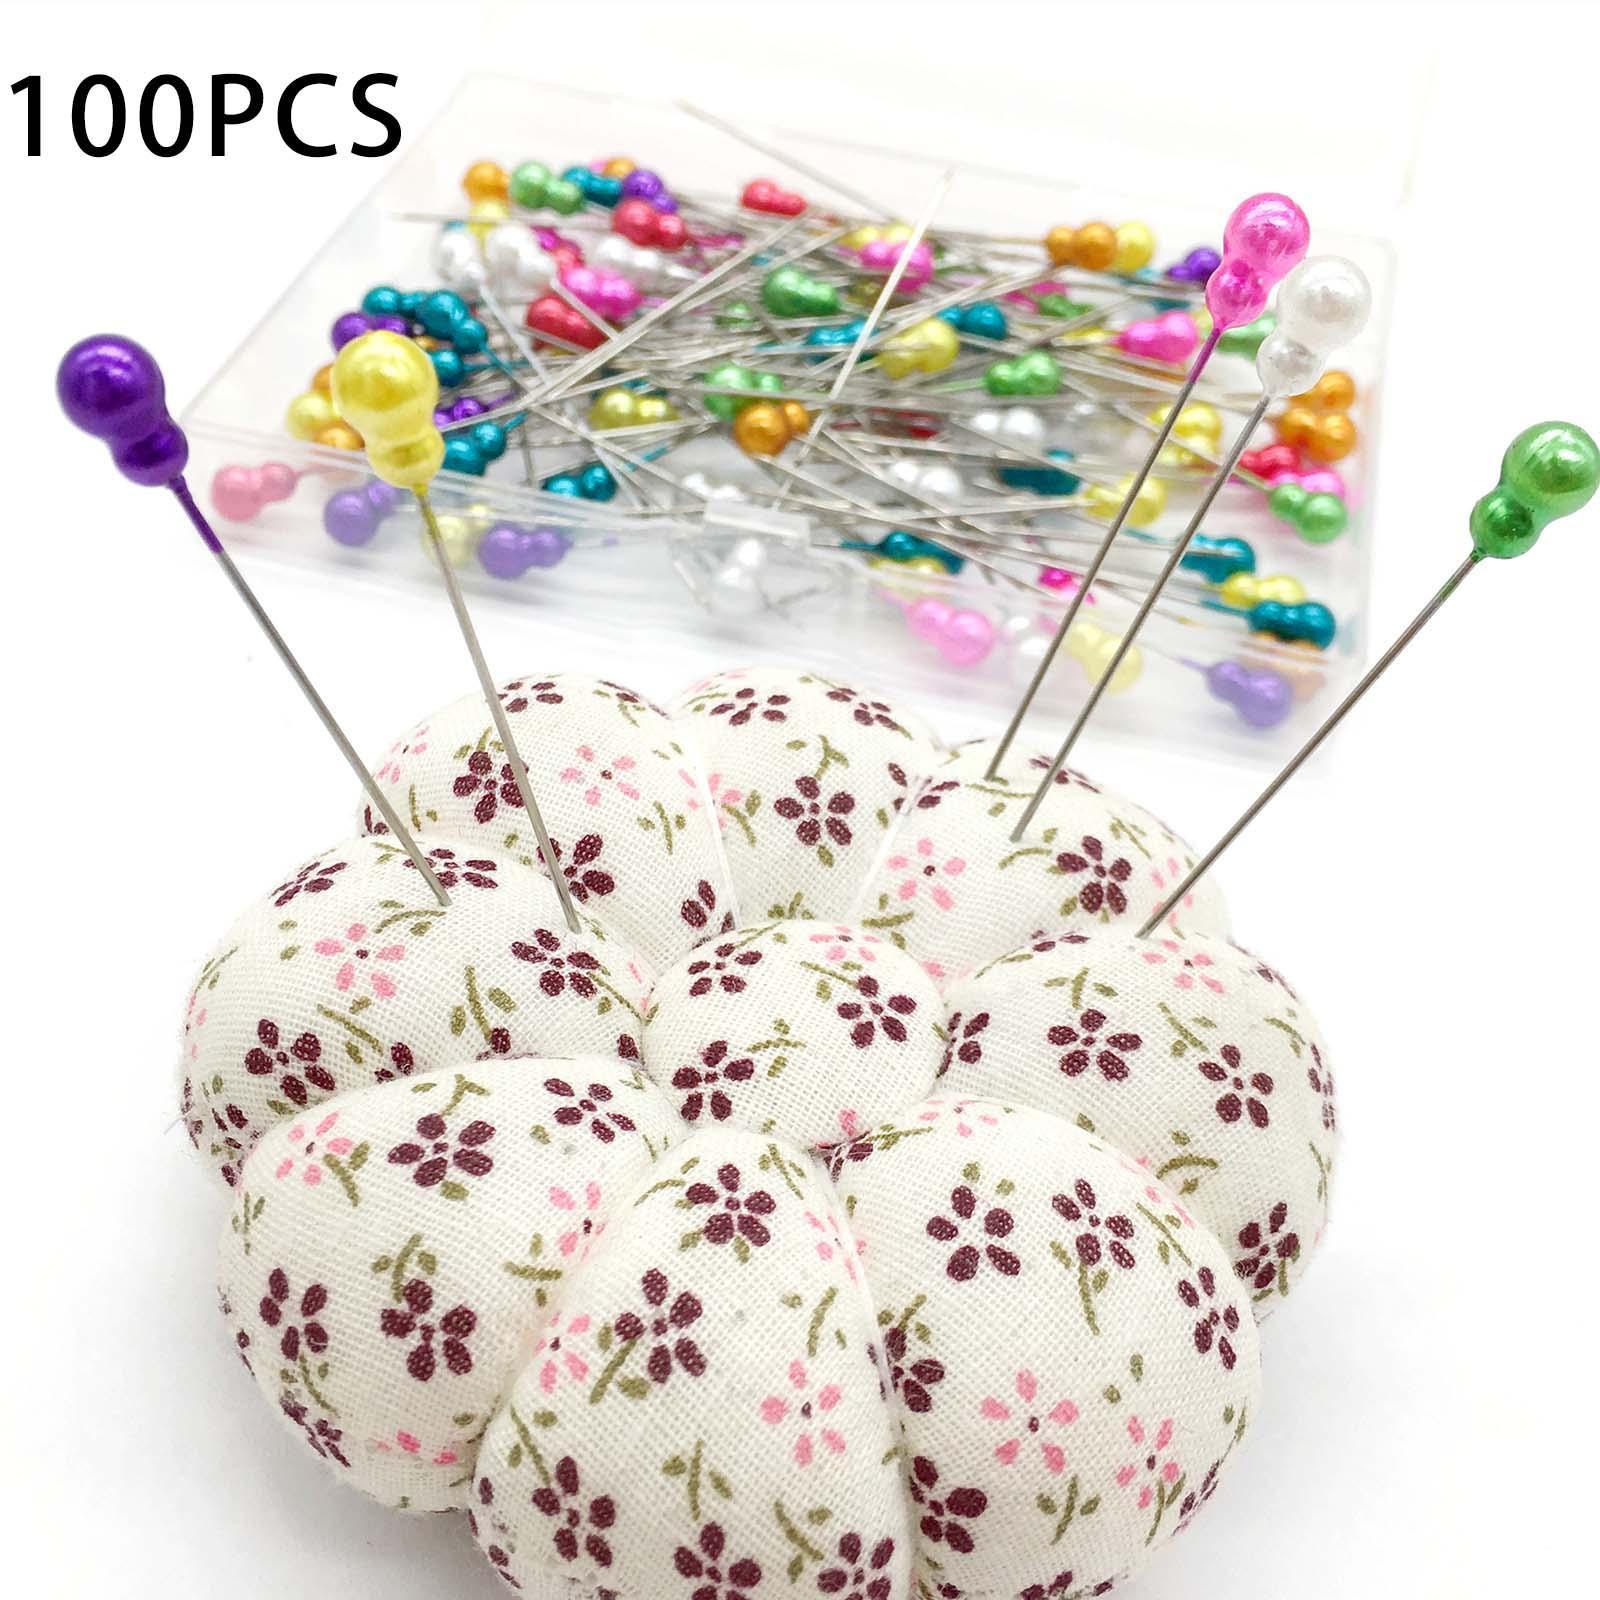 100pcs Decorative Pearl Head Pin Straight Sewing Pin for Corsage Dressmaking